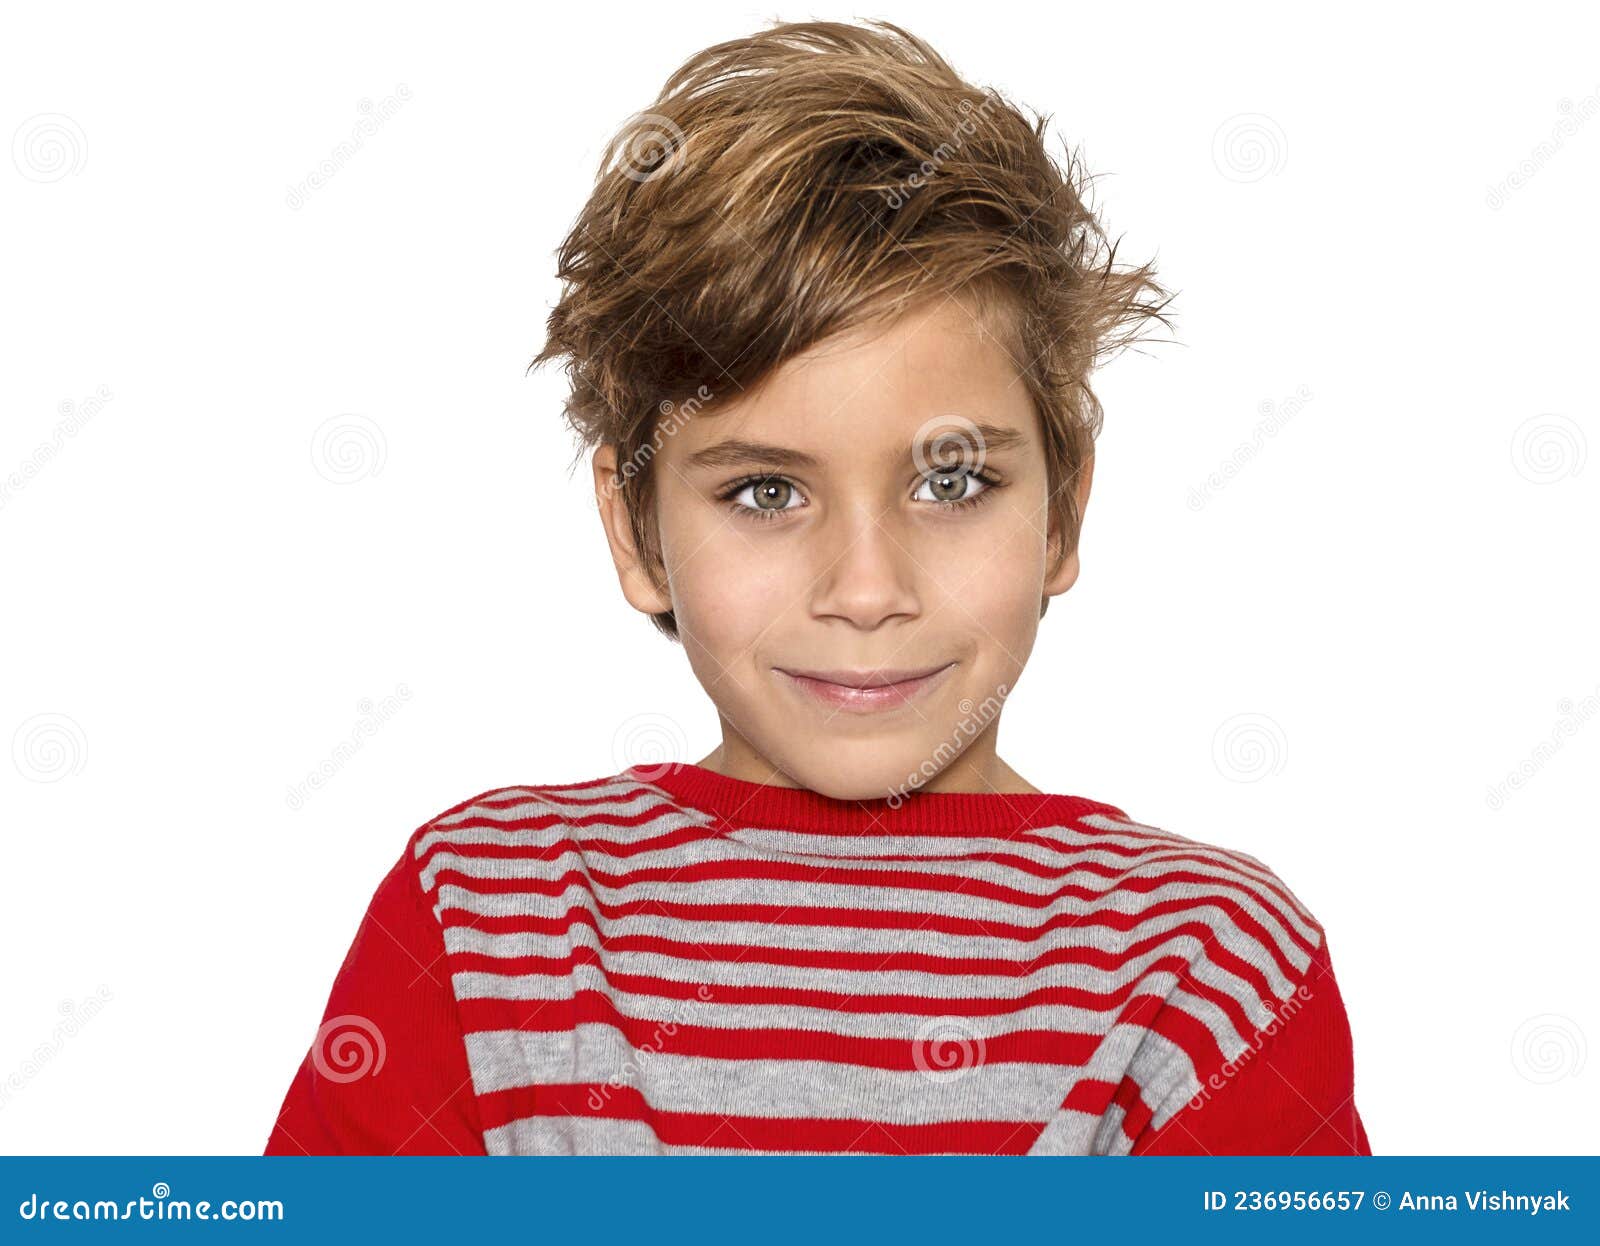 Cute Toddler Boy with Blonde Hair and Freckles - wide 5